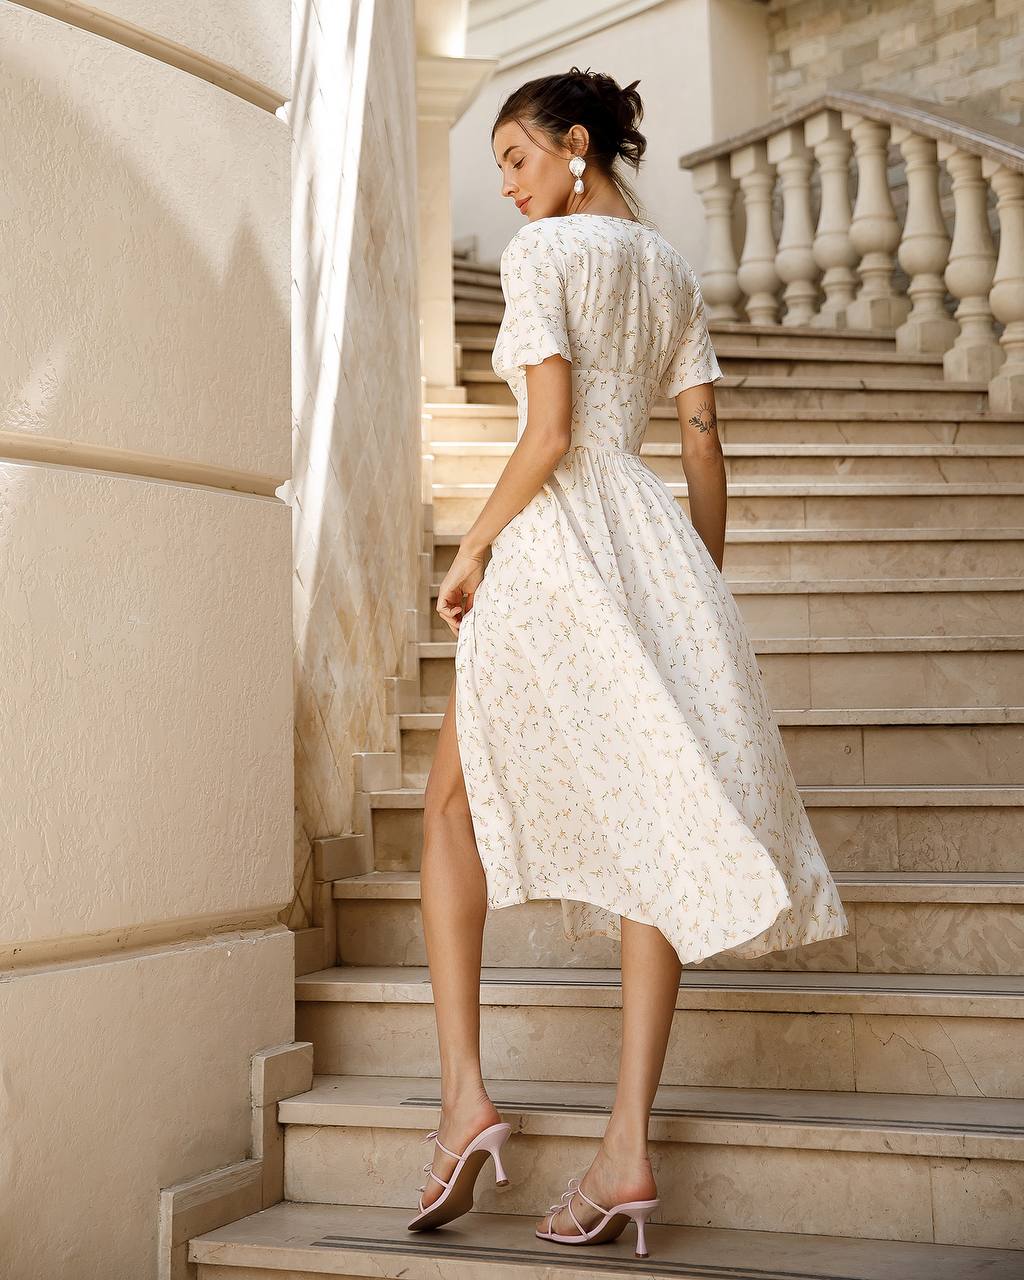 a woman in a white dress is standing on some steps